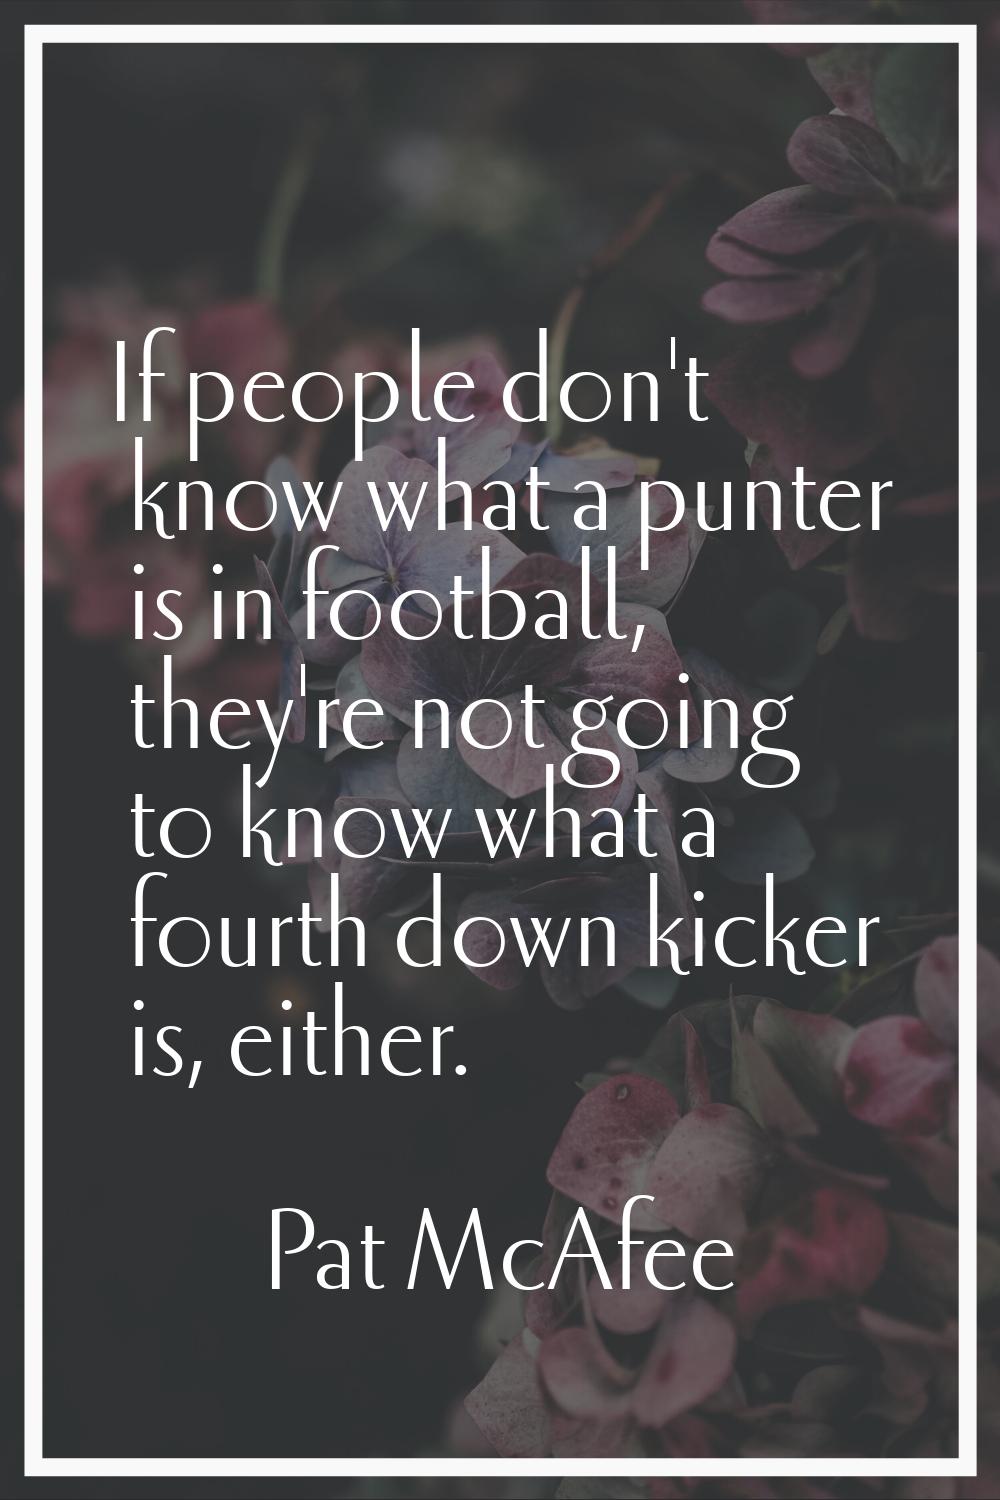 If people don't know what a punter is in football, they're not going to know what a fourth down kic